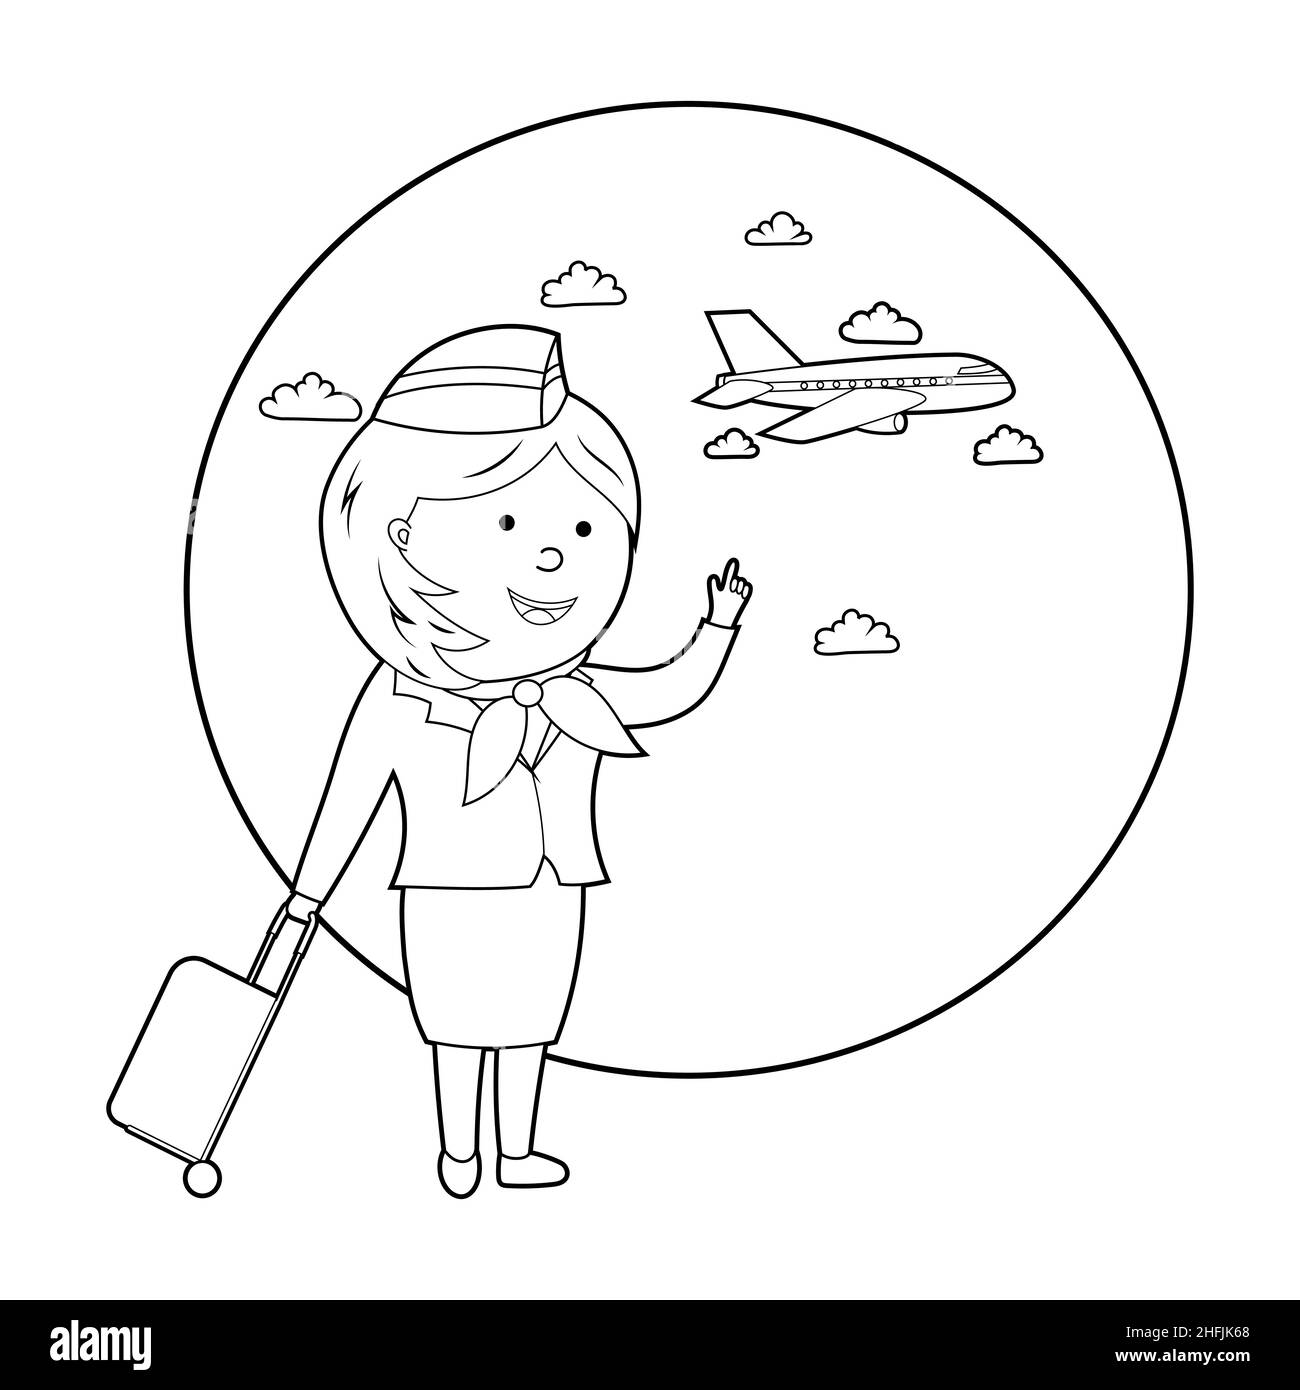 coloring book. cartoon illustration of a flight attendant and an airplane, vector isolated on a white background Stock Vector